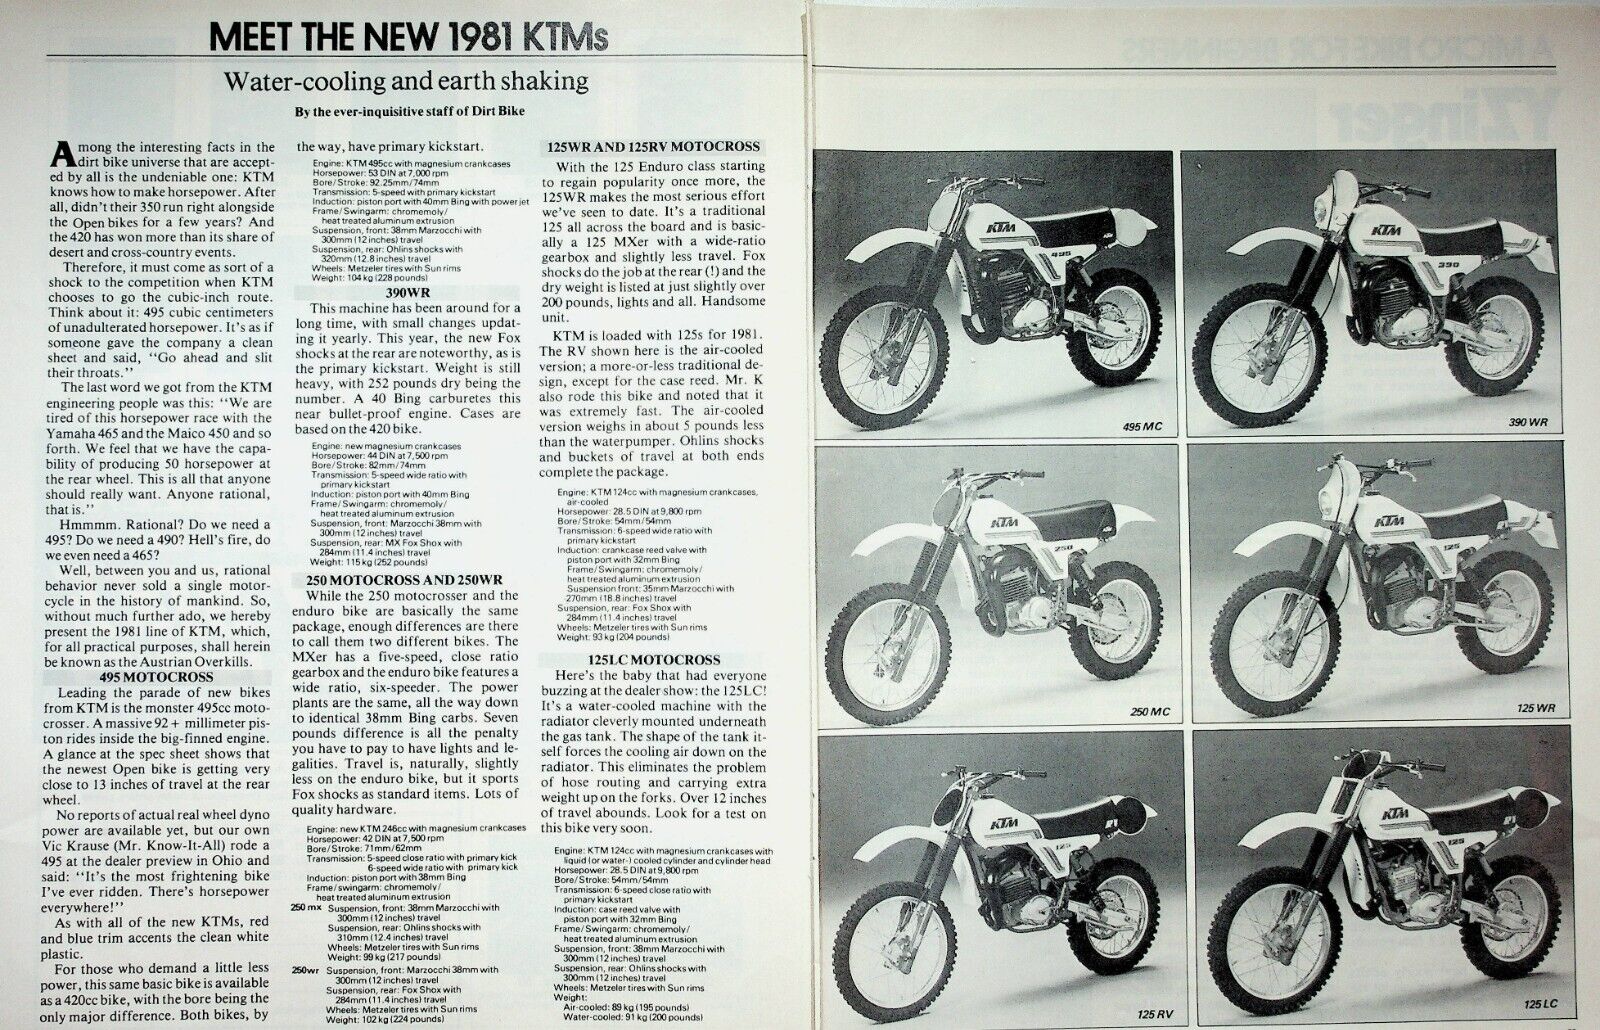 1981 KTM Motocross Motorcycles - 2-Page Vintage Ad